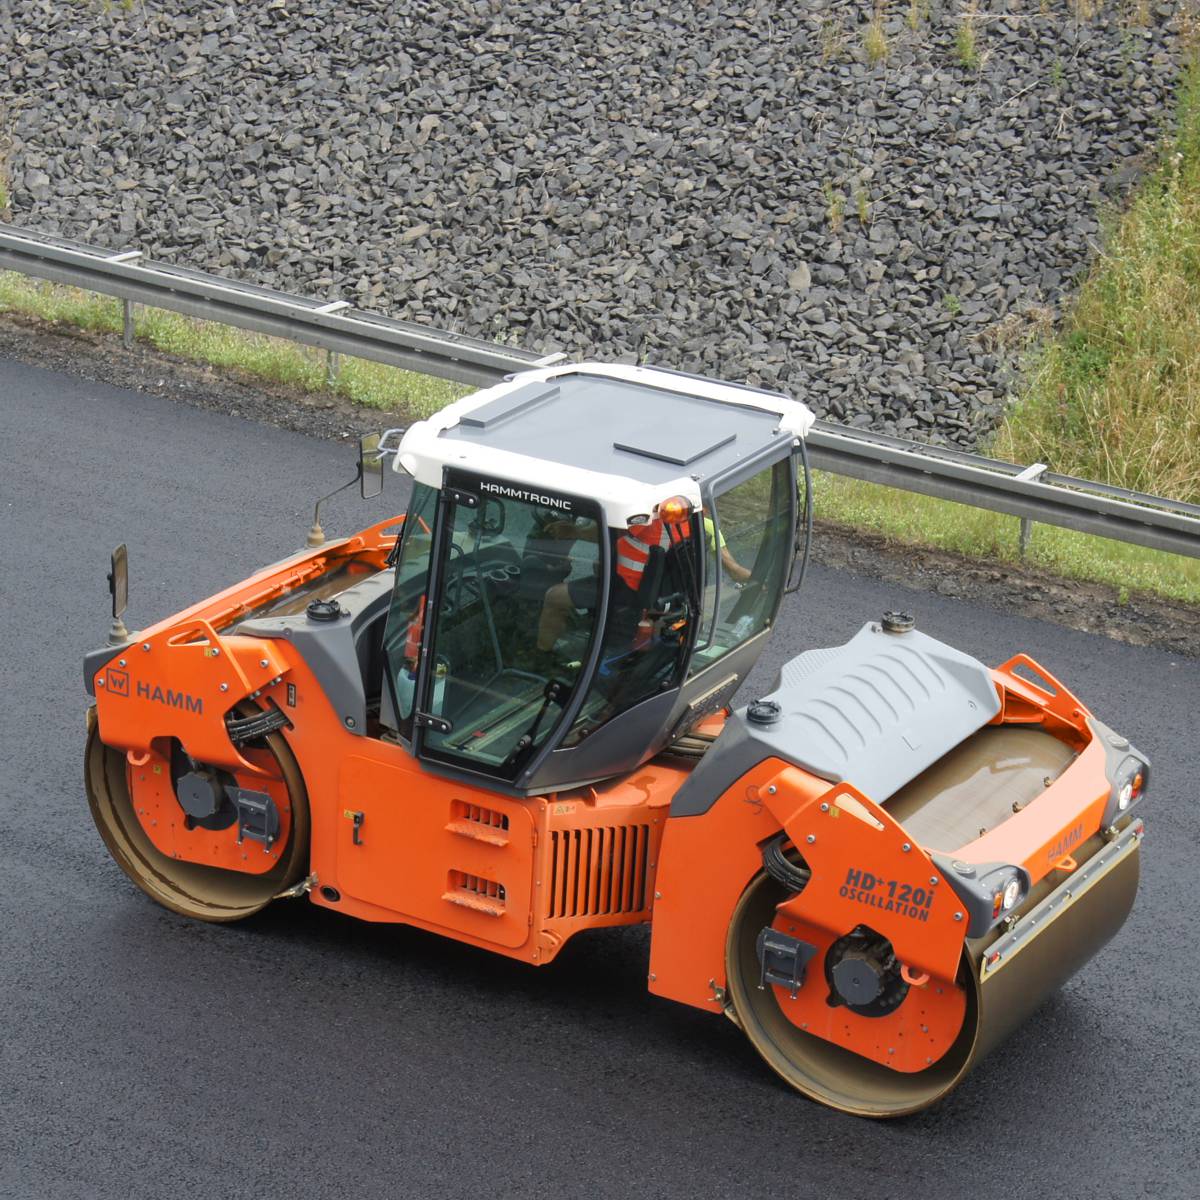 A HAMM HD+ 120i OV tandem roller compacting the surface course of a busy highway